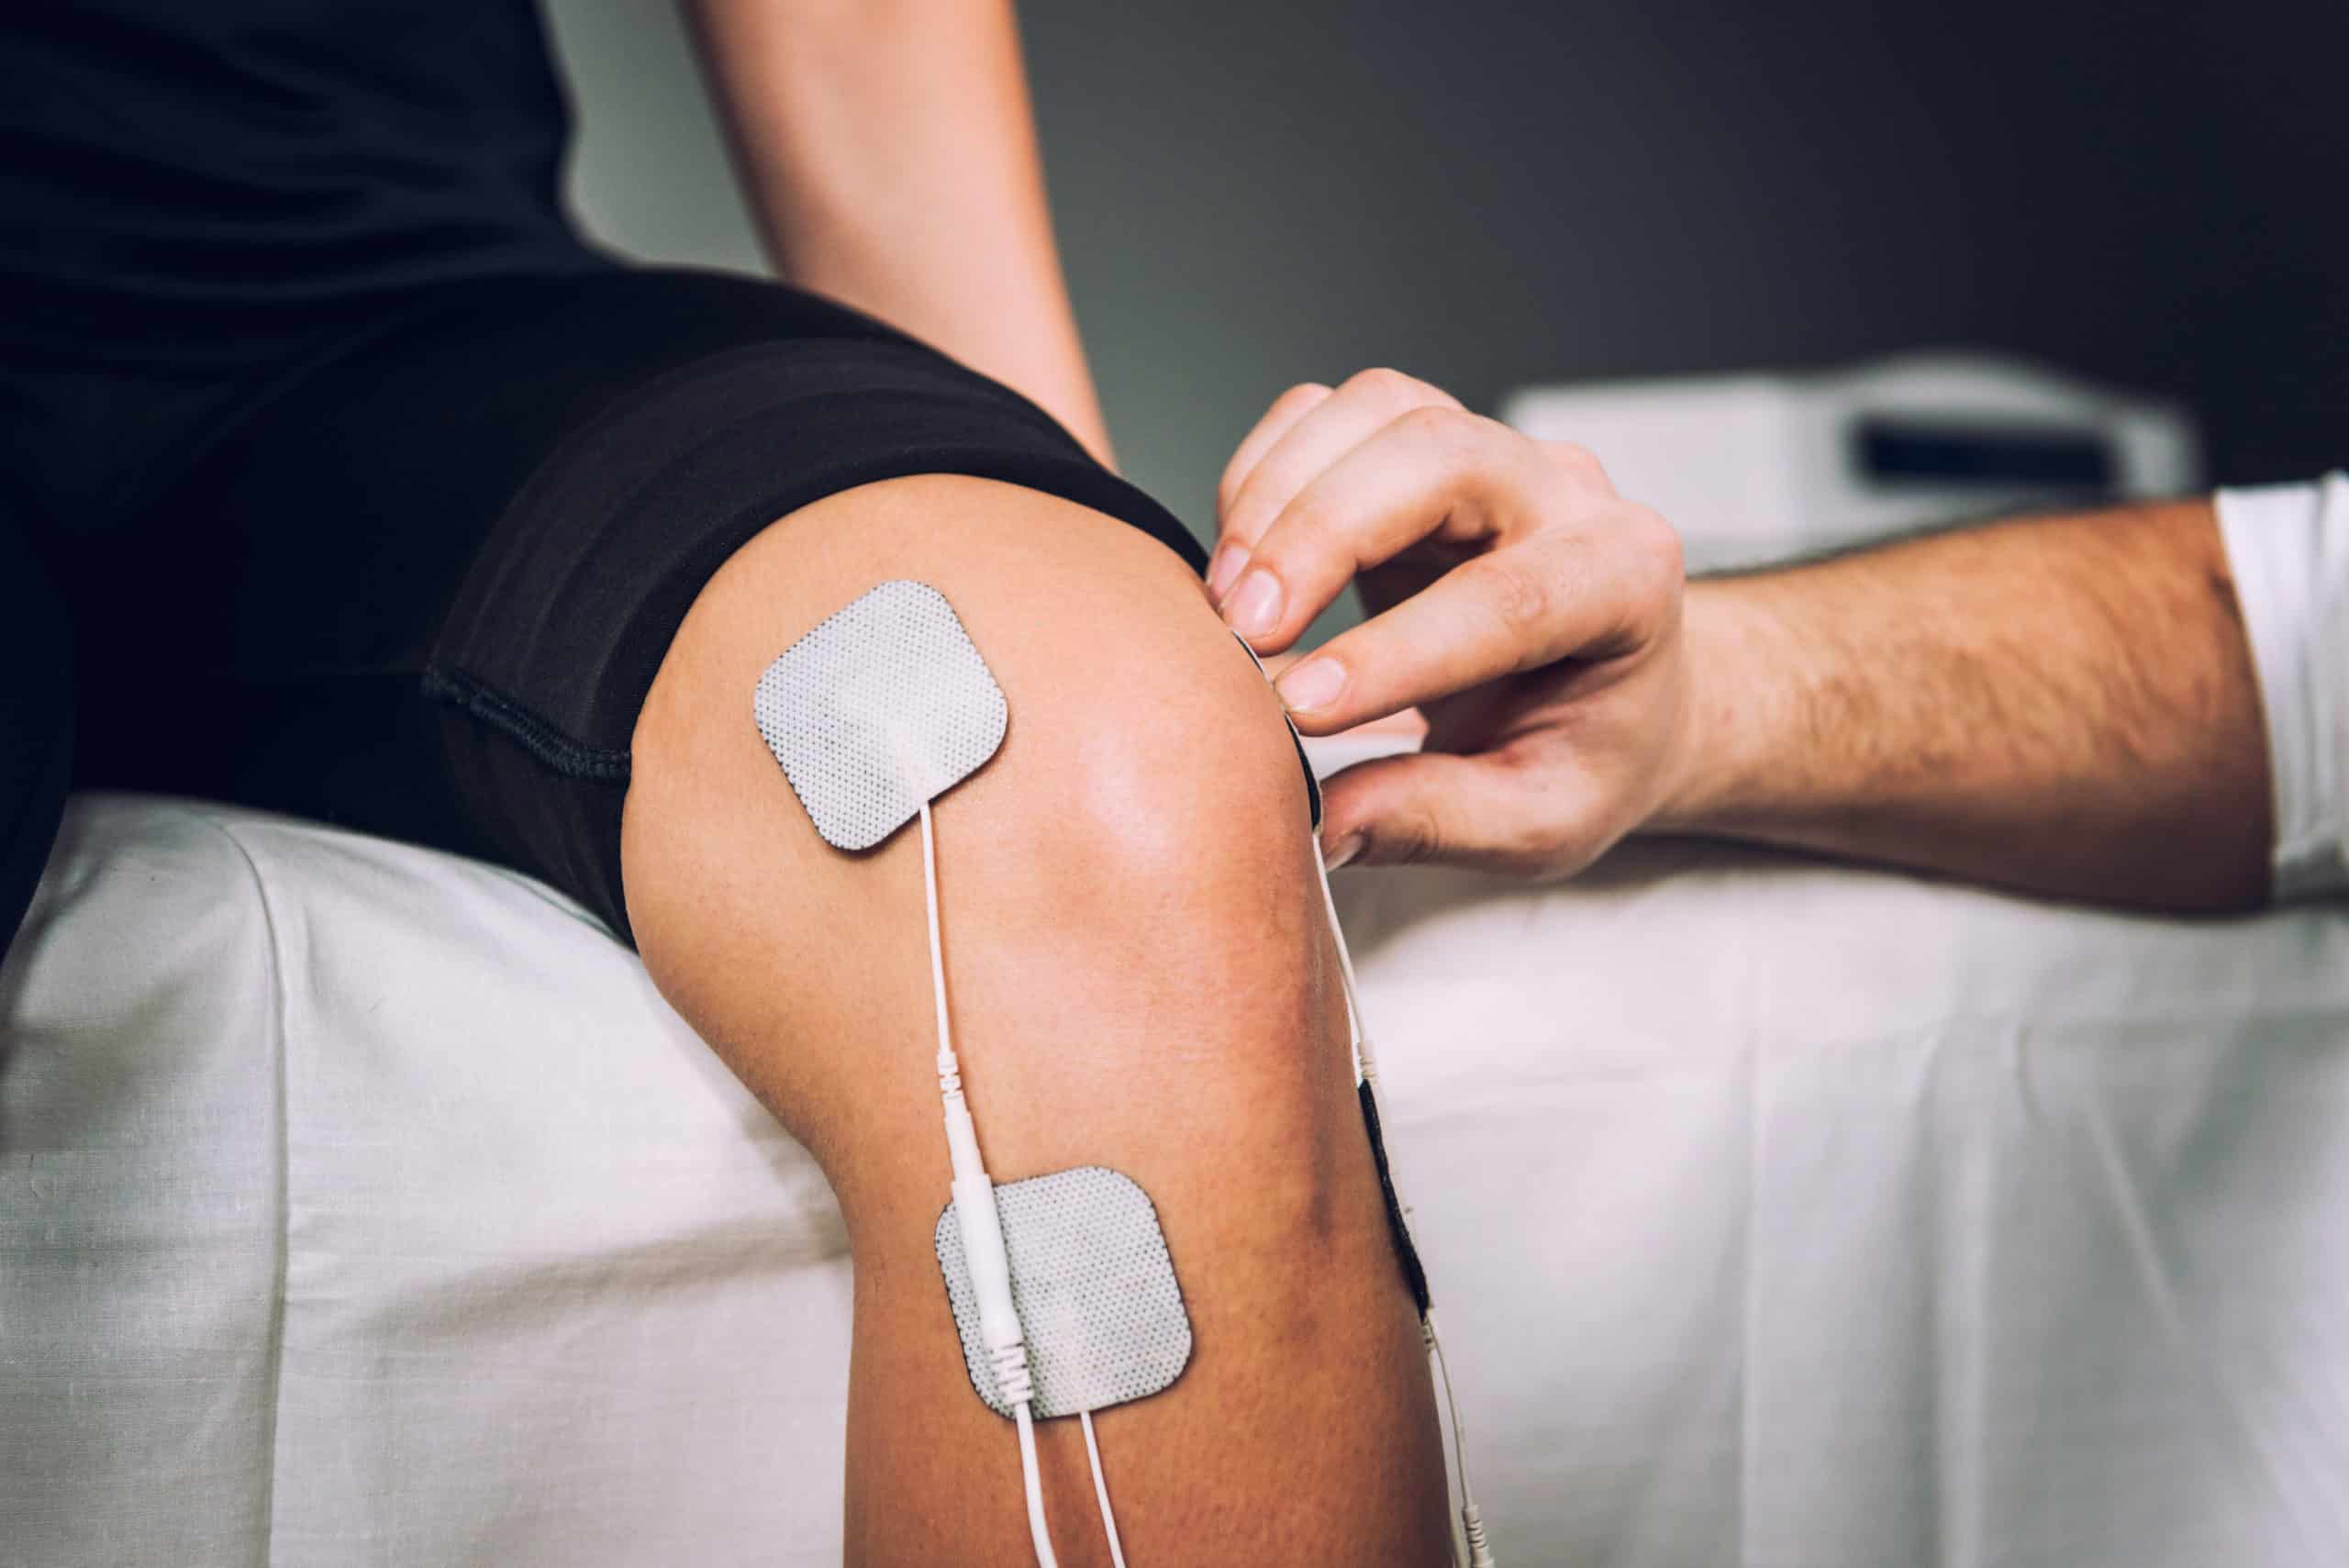 Electrical Muscle Stimulation And Using a TENS Unit To Boost